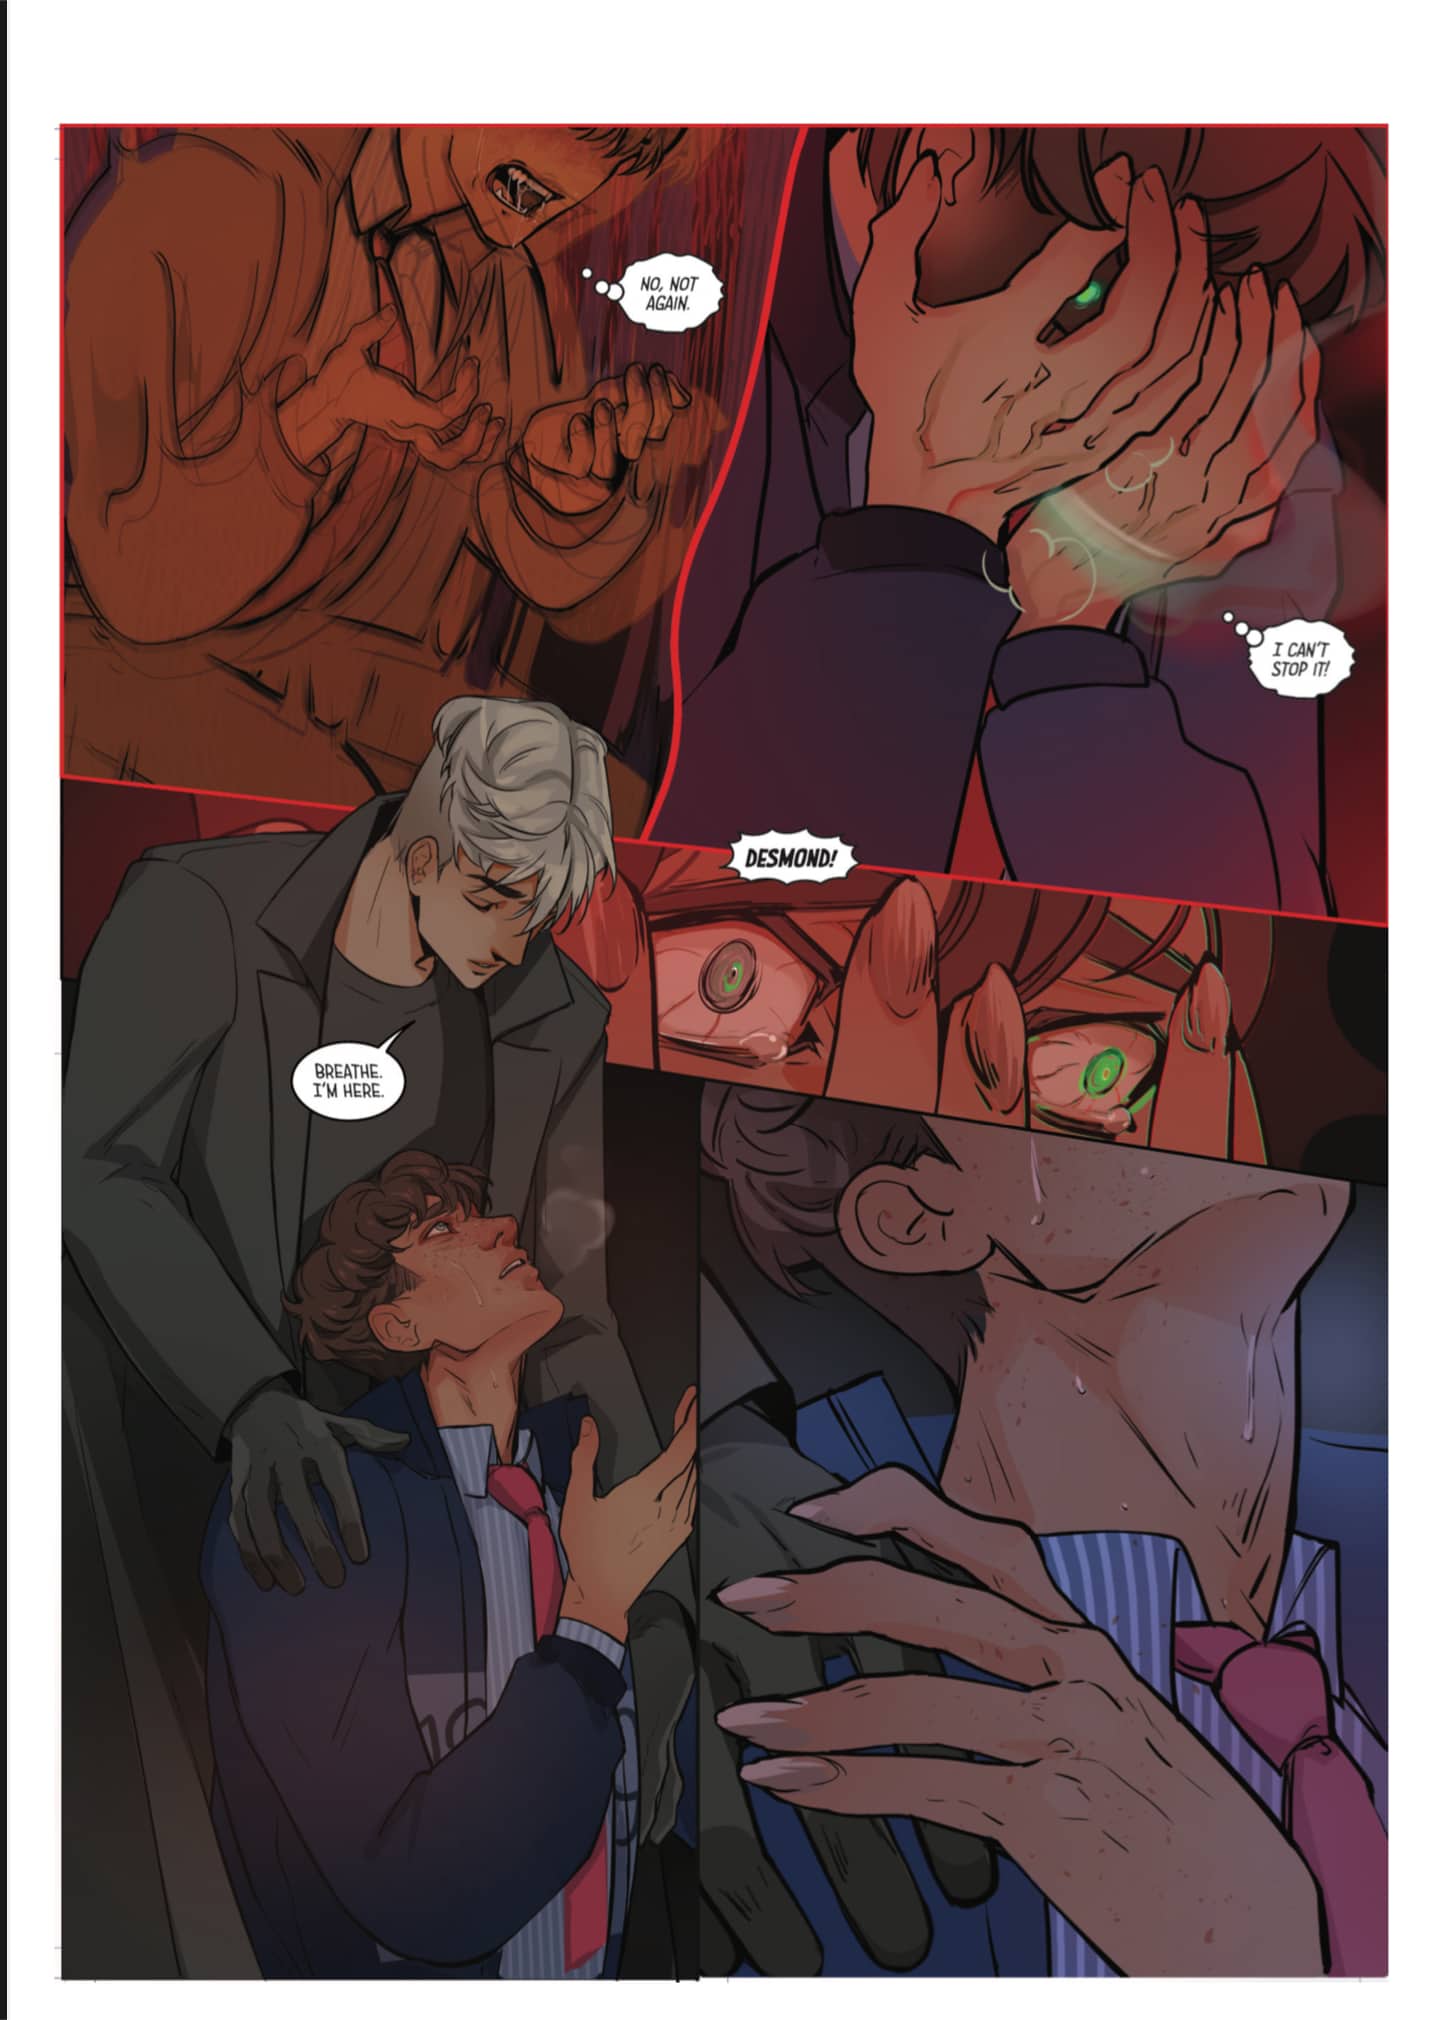 Screenshot from Judas Complex where Desmond is starting to shift into a werewolf and lose control, so Constantine reminds him to breathe and helps him